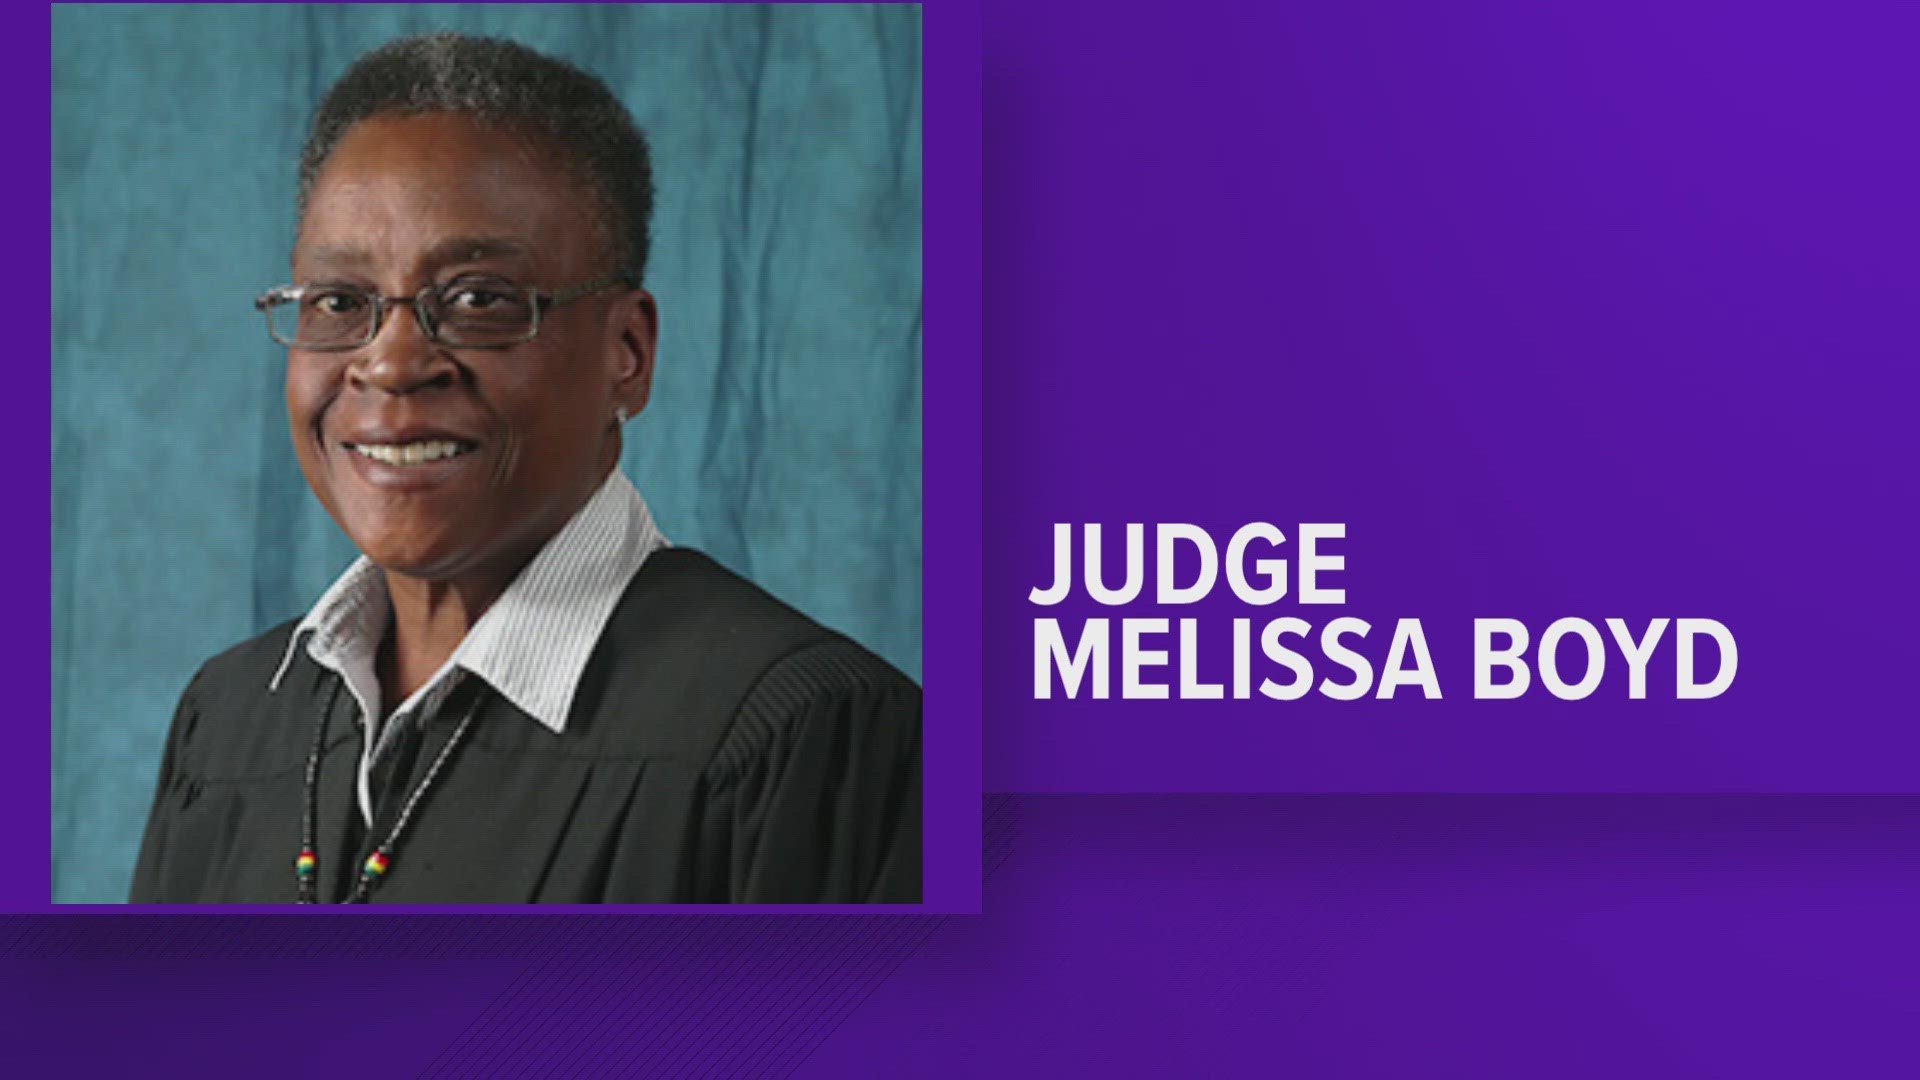 Shelby County Judge A. Melissa Boyd has previously been investigated by the Tennessee Board of Judicial Conduct and was suspended by the board in May.